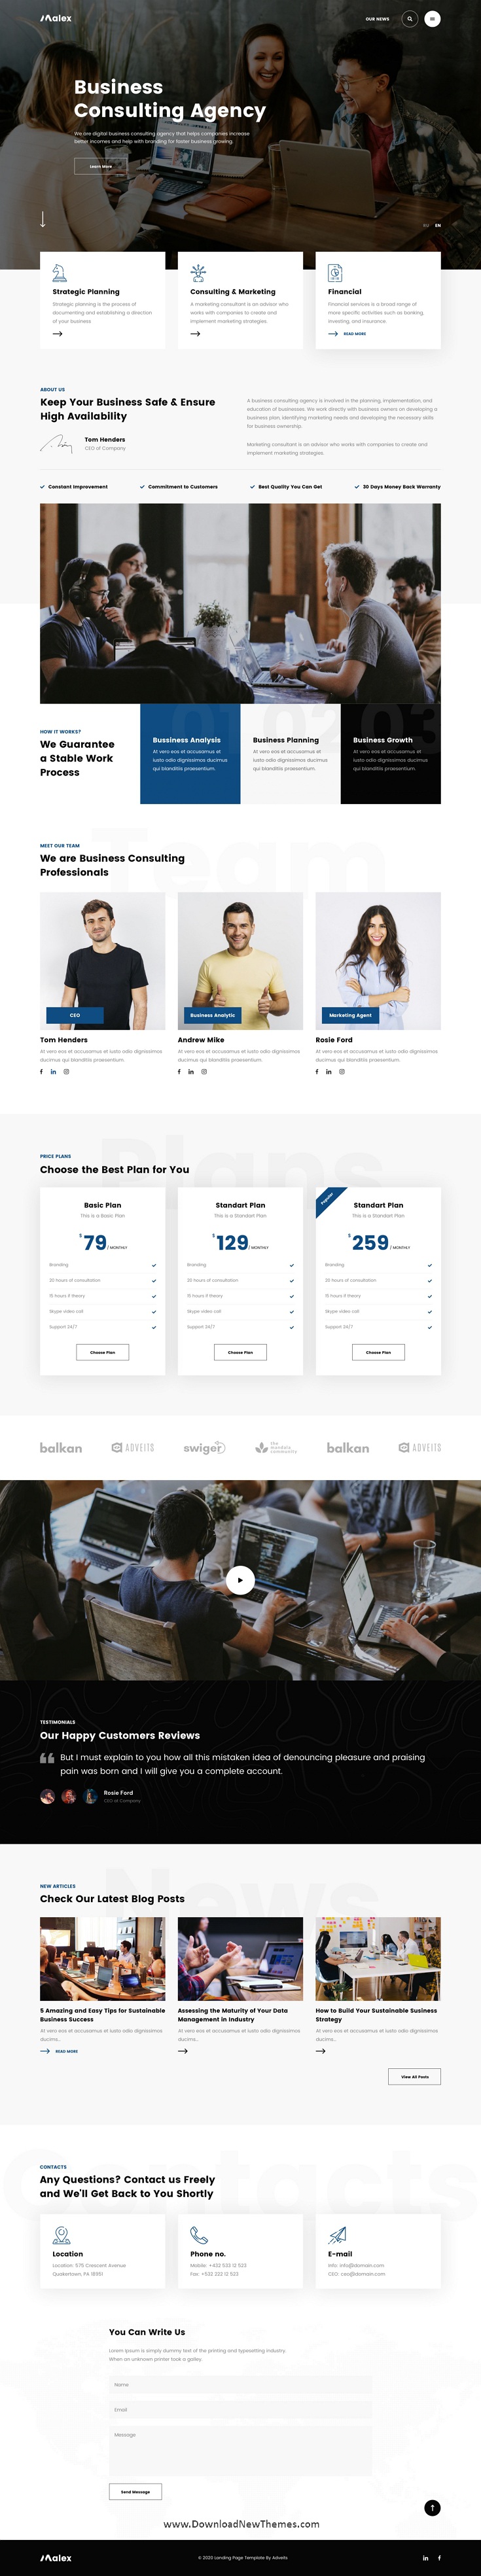 Business Consulting Agency Adobe XD Template